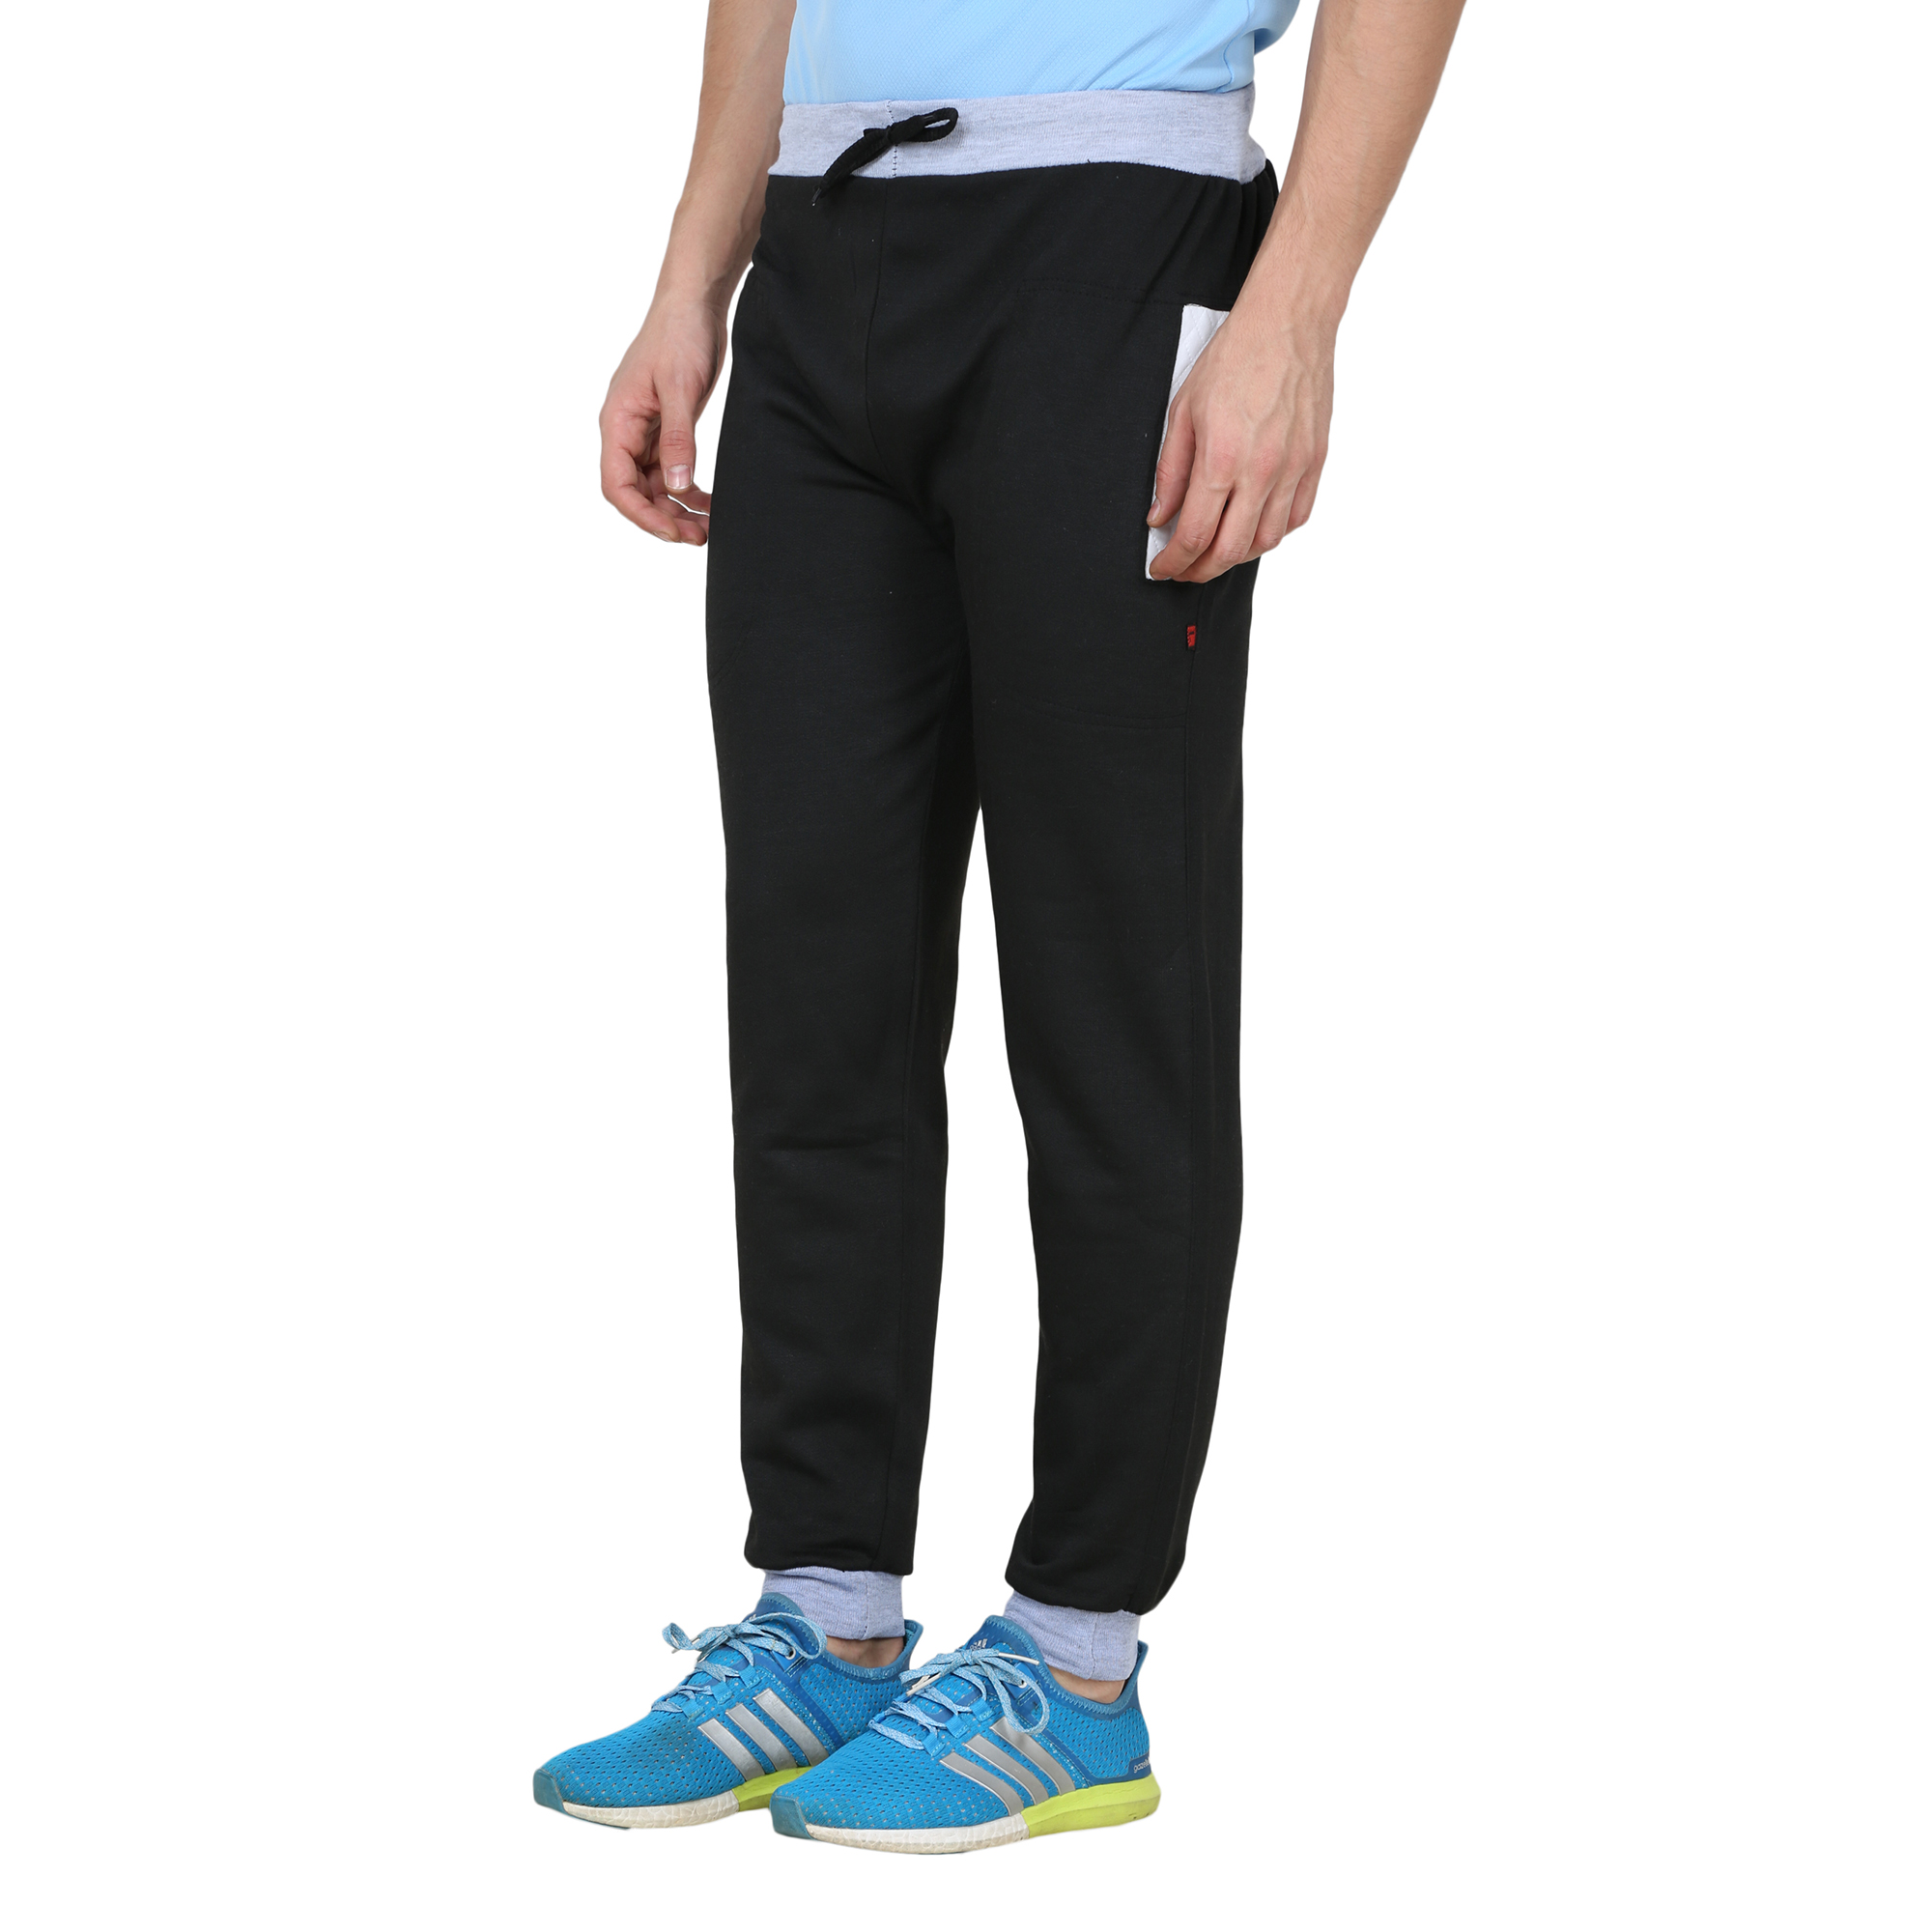 Buy Swaggy Solid Men's Track Pants Online @ ₹349 from ShopClues